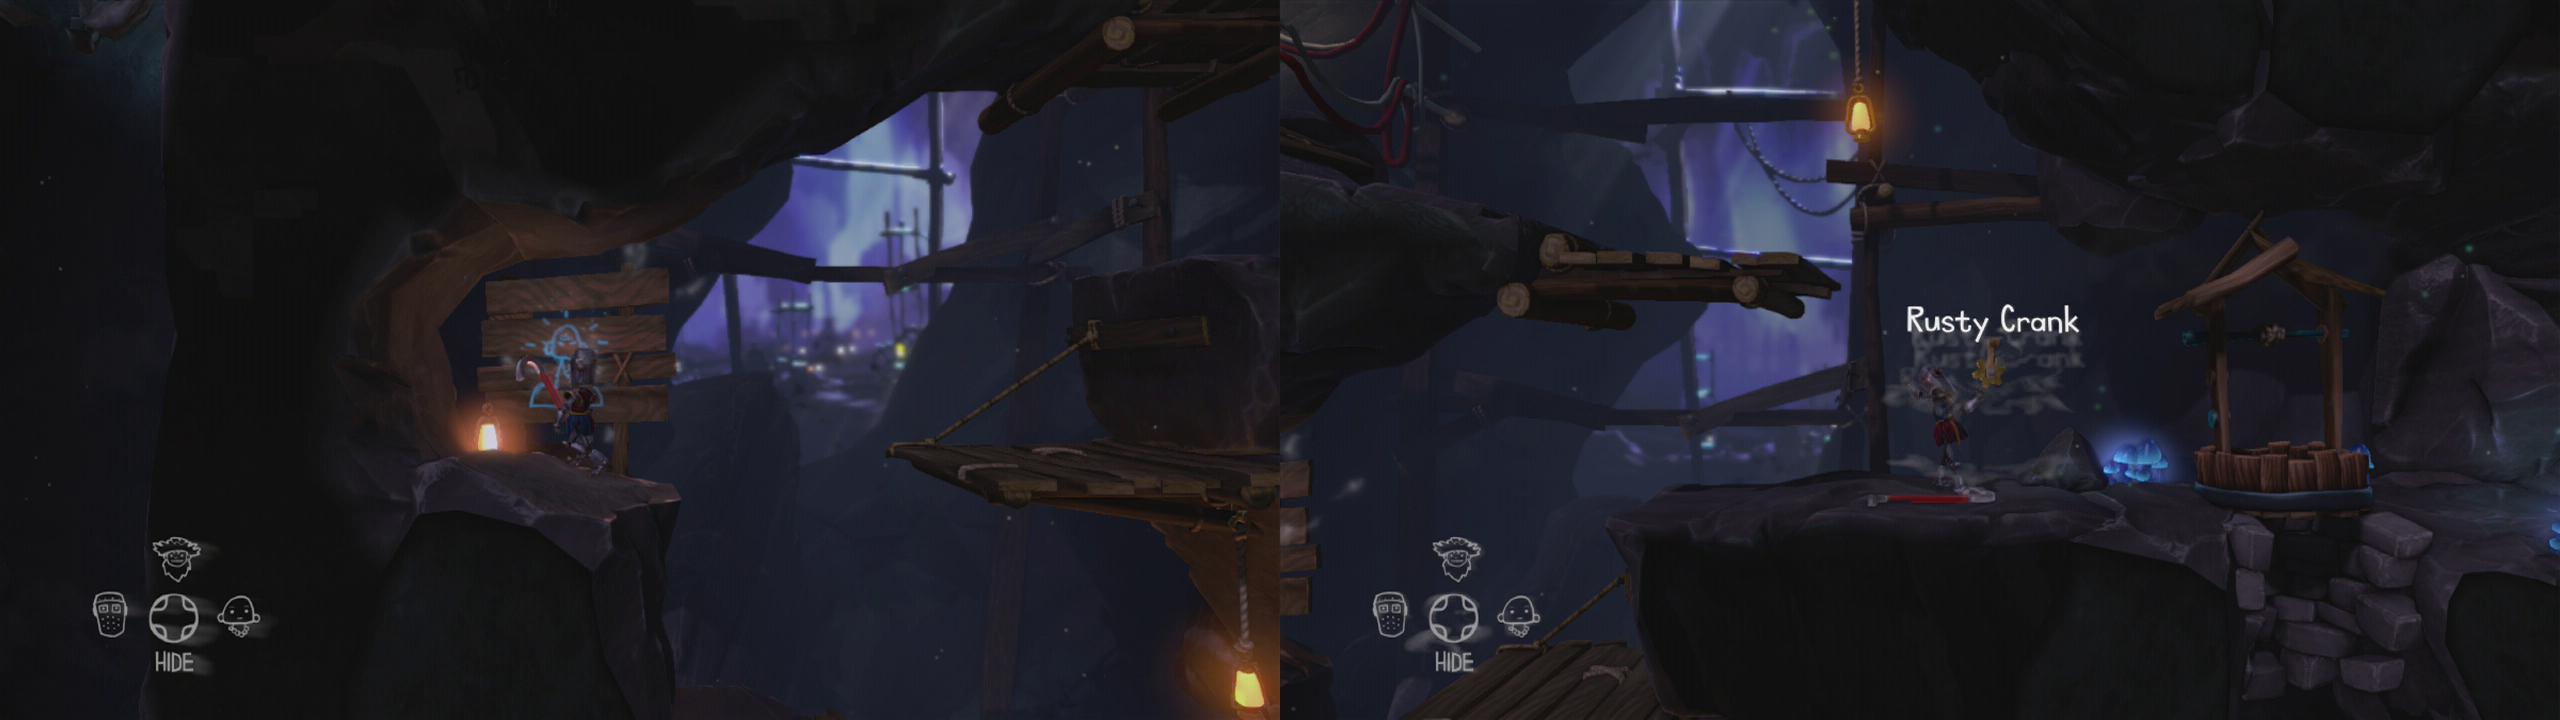 Grab the Cave painting (left) on the way to a second well we can use the crowbar on for a rusty crank (right).